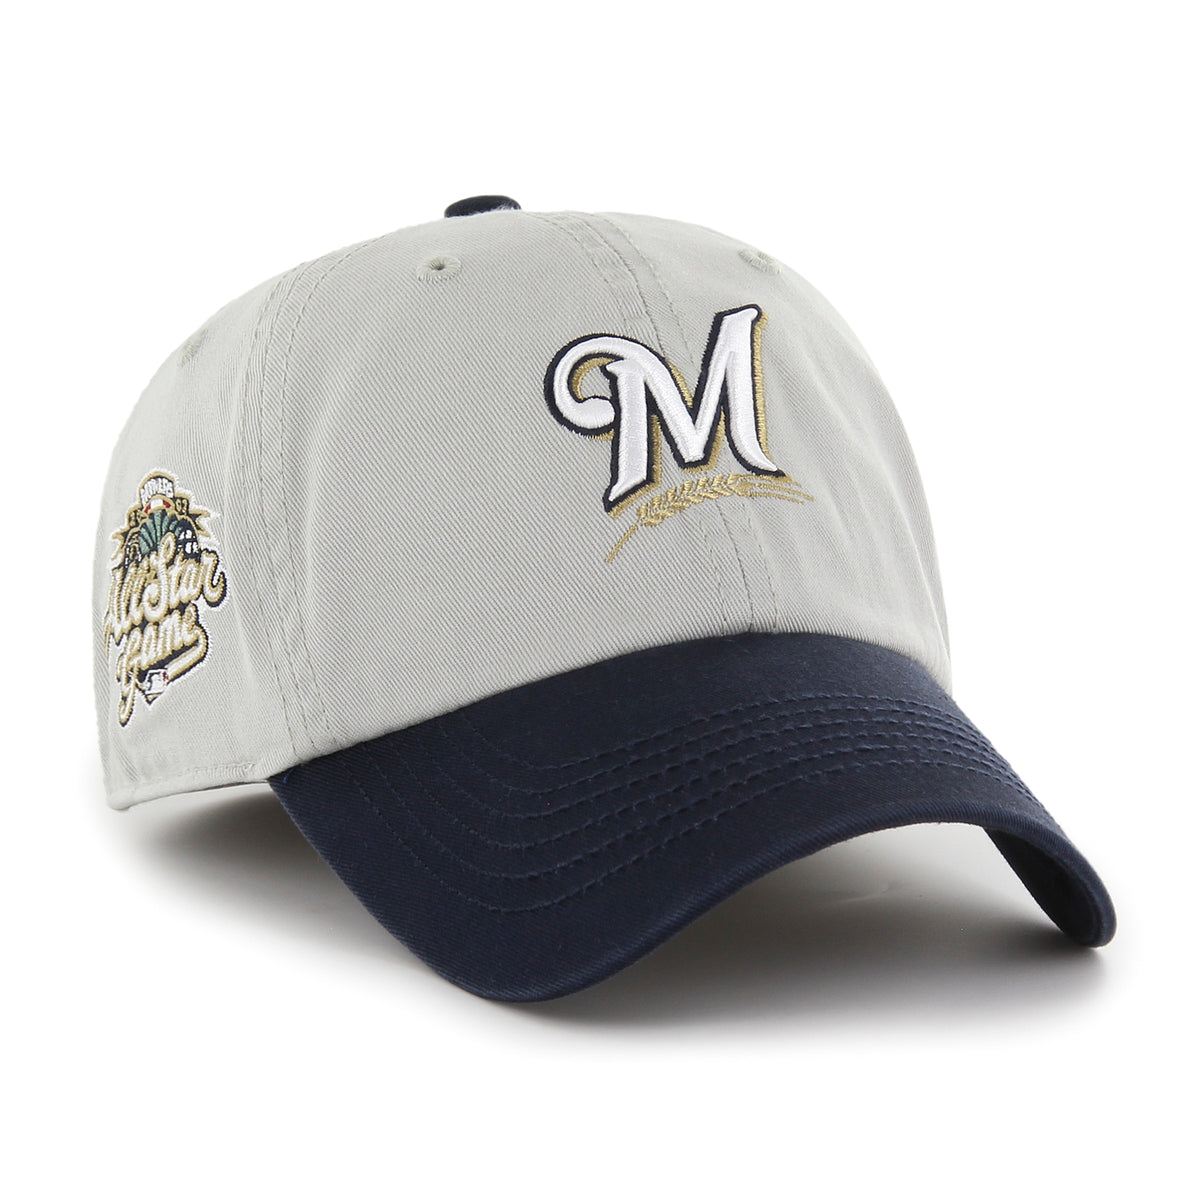 MILWAUKEE BREWERS COOPERSTOWN ALL STAR GAME SURE SHOT CLASSIC TWO TONE '47 FRANCHISE